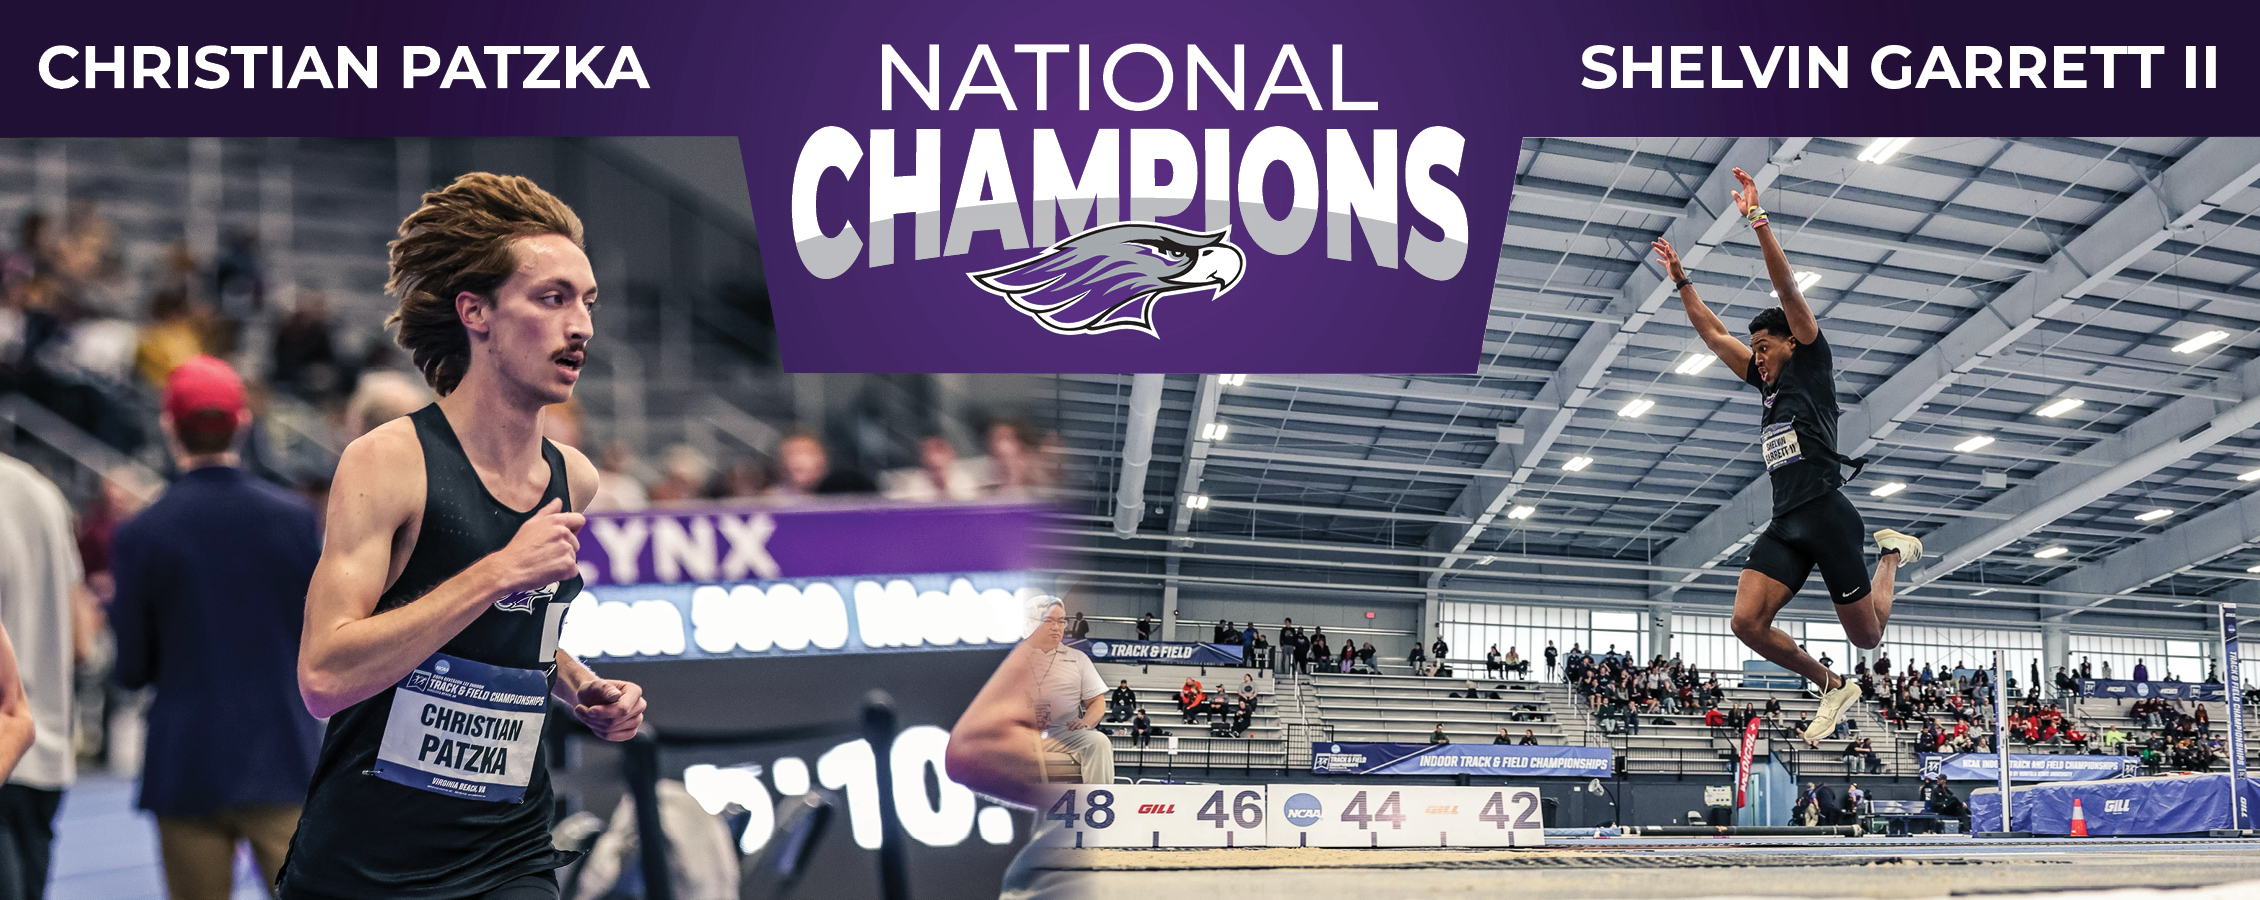 Two track and field athletes, one is running, the other jumping and it says national champions.